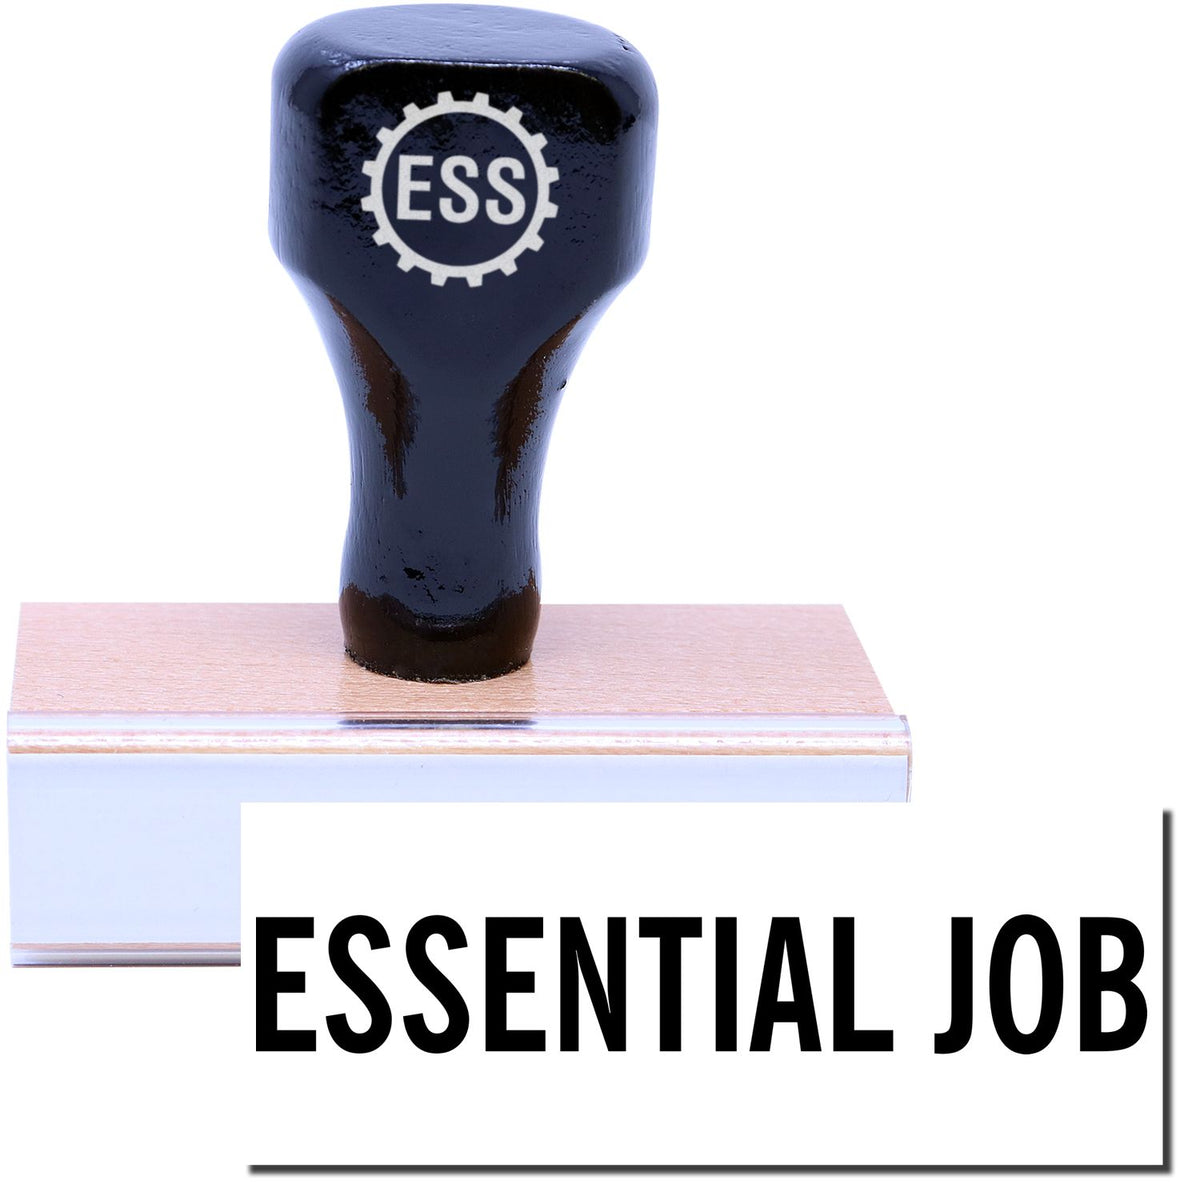 A stock office rubber stamp with a stamped image showing how the text &quot;ESSENTIAL JOB&quot; is displayed after stamping.